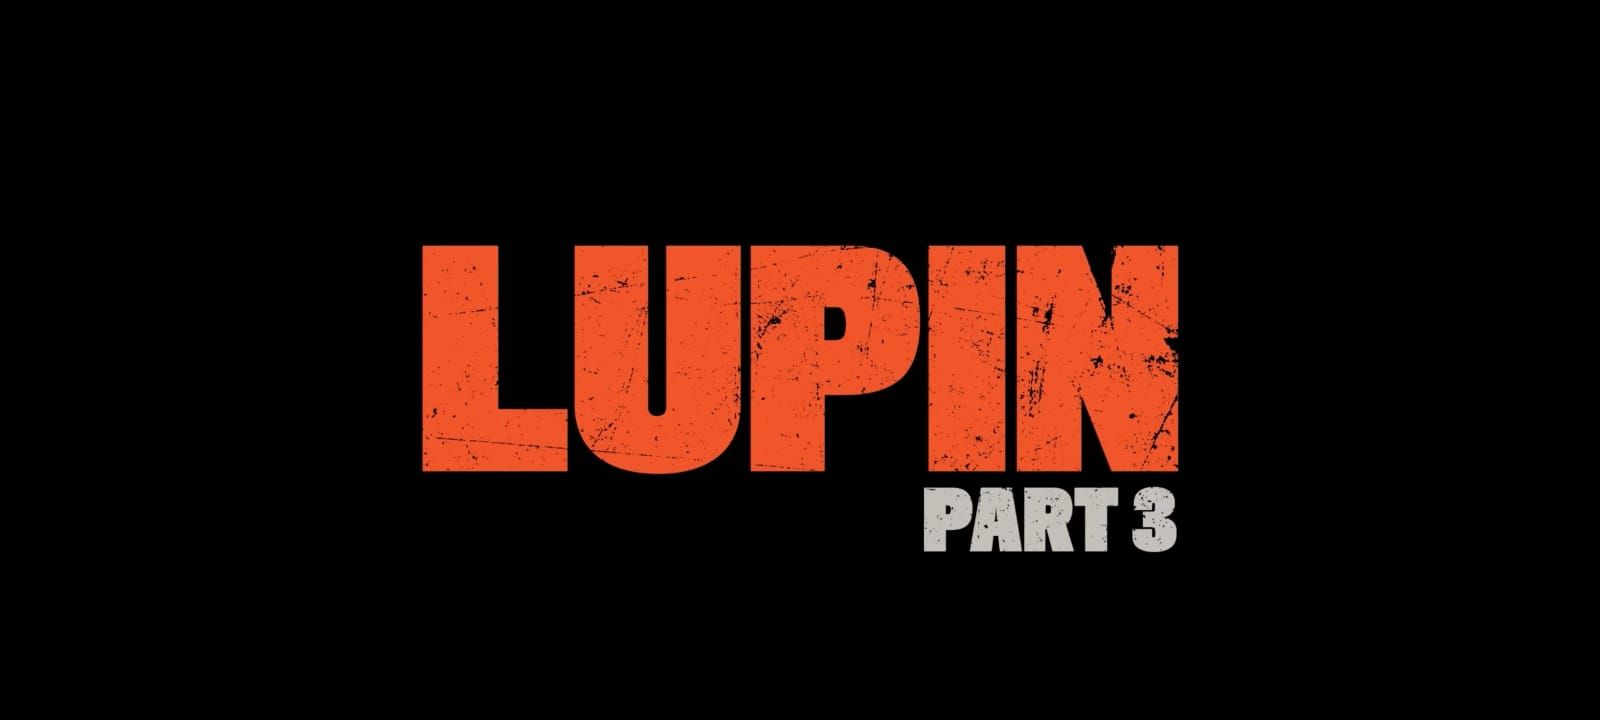 Lupin season 3: Release date, cast, plot, and more